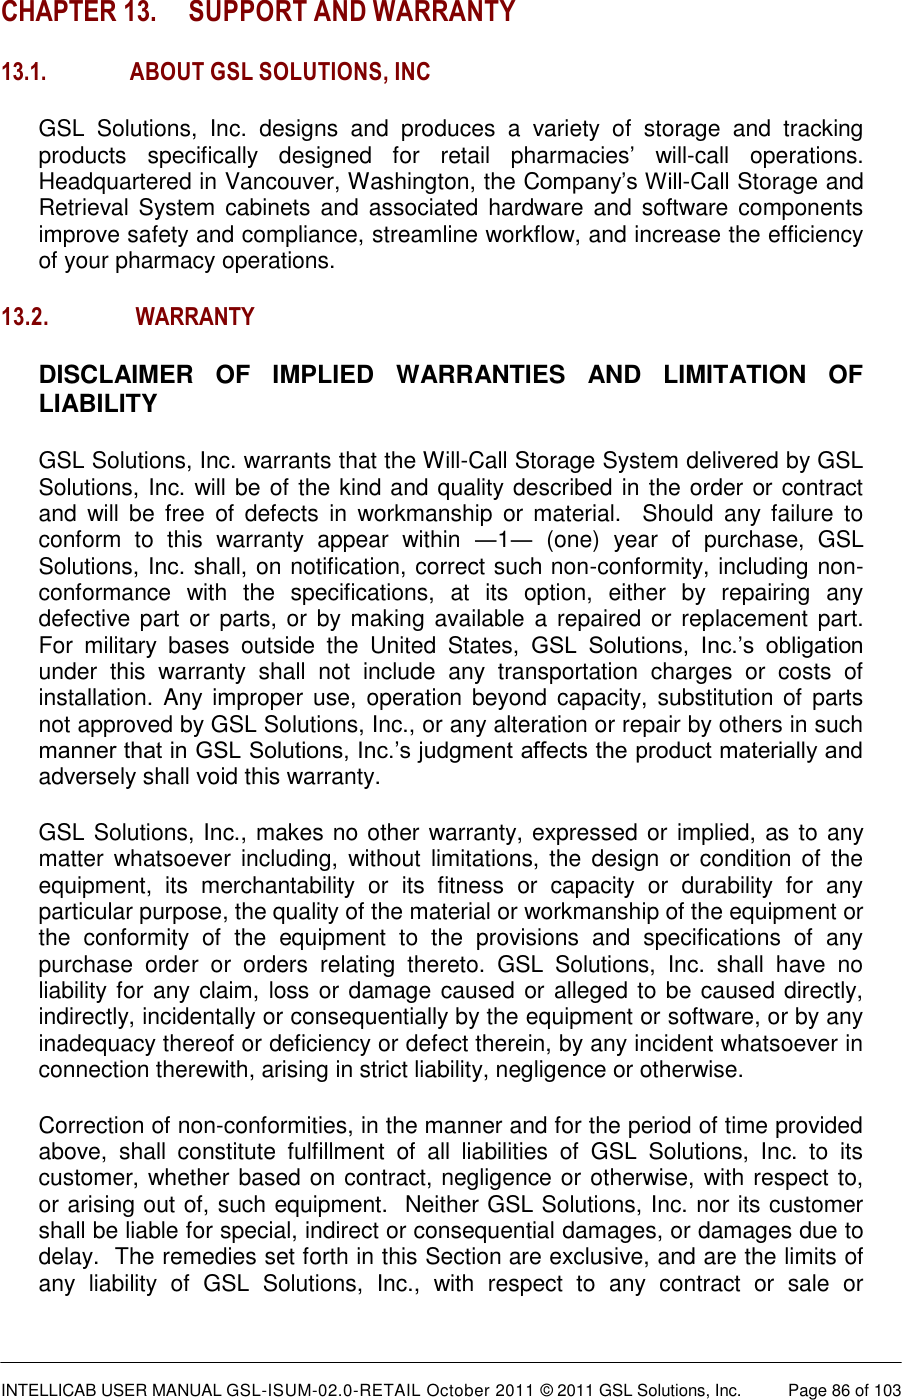  INTELLICAB USER MANUAL GSL-ISUM-02.0-RETAIL October 2011 © 2011 GSL Solutions, Inc.   Page 86 of 103   CHAPTER 13. SUPPORT AND WARRANTY 13.1. ABOUT GSL SOLUTIONS, INC GSL  Solutions,  Inc.  designs  and  produces  a  variety  of  storage  and  tracking products  specifically  designed  for  retail  pharmacies’  will-call  operations. Headquartered in Vancouver, Washington, the Company’s Will-Call Storage and Retrieval  System  cabinets  and  associated hardware and  software components improve safety and compliance, streamline workflow, and increase the efficiency of your pharmacy operations. 13.2.  WARRANTY DISCLAIMER  OF  IMPLIED  WARRANTIES  AND  LIMITATION  OF LIABILITY GSL Solutions, Inc. warrants that the Will-Call Storage System delivered by GSL Solutions, Inc. will be of the kind and quality described in the order or contract and  will  be  free  of  defects  in  workmanship  or  material.    Should  any  failure  to conform  to  this  warranty  appear  within  ―1―  (one)  year  of  purchase,  GSL Solutions, Inc. shall, on notification, correct such non-conformity, including non-conformance  with  the  specifications,  at  its  option,  either  by  repairing  any defective part  or parts, or  by making available a  repaired or  replacement part.  For  military  bases  outside  the  United  States,  GSL  Solutions,  Inc.’s  obligation under  this  warranty  shall  not  include  any  transportation  charges  or  costs  of installation. Any  improper  use,  operation  beyond capacity,  substitution of  parts not approved by GSL Solutions, Inc., or any alteration or repair by others in such manner that in GSL Solutions, Inc.’s judgment affects the product materially and adversely shall void this warranty. GSL Solutions, Inc., makes no other warranty, expressed or implied, as to any matter  whatsoever  including,  without  limitations,  the  design  or  condition  of  the equipment,  its  merchantability  or  its  fitness  or  capacity  or  durability  for  any particular purpose, the quality of the material or workmanship of the equipment or the  conformity  of  the  equipment  to  the  provisions  and  specifications  of  any purchase  order  or  orders  relating  thereto.  GSL  Solutions,  Inc.  shall  have  no liability for any claim, loss or damage caused or alleged to be caused directly, indirectly, incidentally or consequentially by the equipment or software, or by any inadequacy thereof or deficiency or defect therein, by any incident whatsoever in connection therewith, arising in strict liability, negligence or otherwise. Correction of non-conformities, in the manner and for the period of time provided above,  shall  constitute  fulfillment  of  all  liabilities  of  GSL  Solutions,  Inc.  to  its customer, whether based on contract, negligence or otherwise, with respect to, or arising out of, such equipment.  Neither GSL Solutions, Inc. nor its customer shall be liable for special, indirect or consequential damages, or damages due to delay.  The remedies set forth in this Section are exclusive, and are the limits of any  liability  of  GSL  Solutions,  Inc.,  with  respect  to  any  contract  or  sale  or 